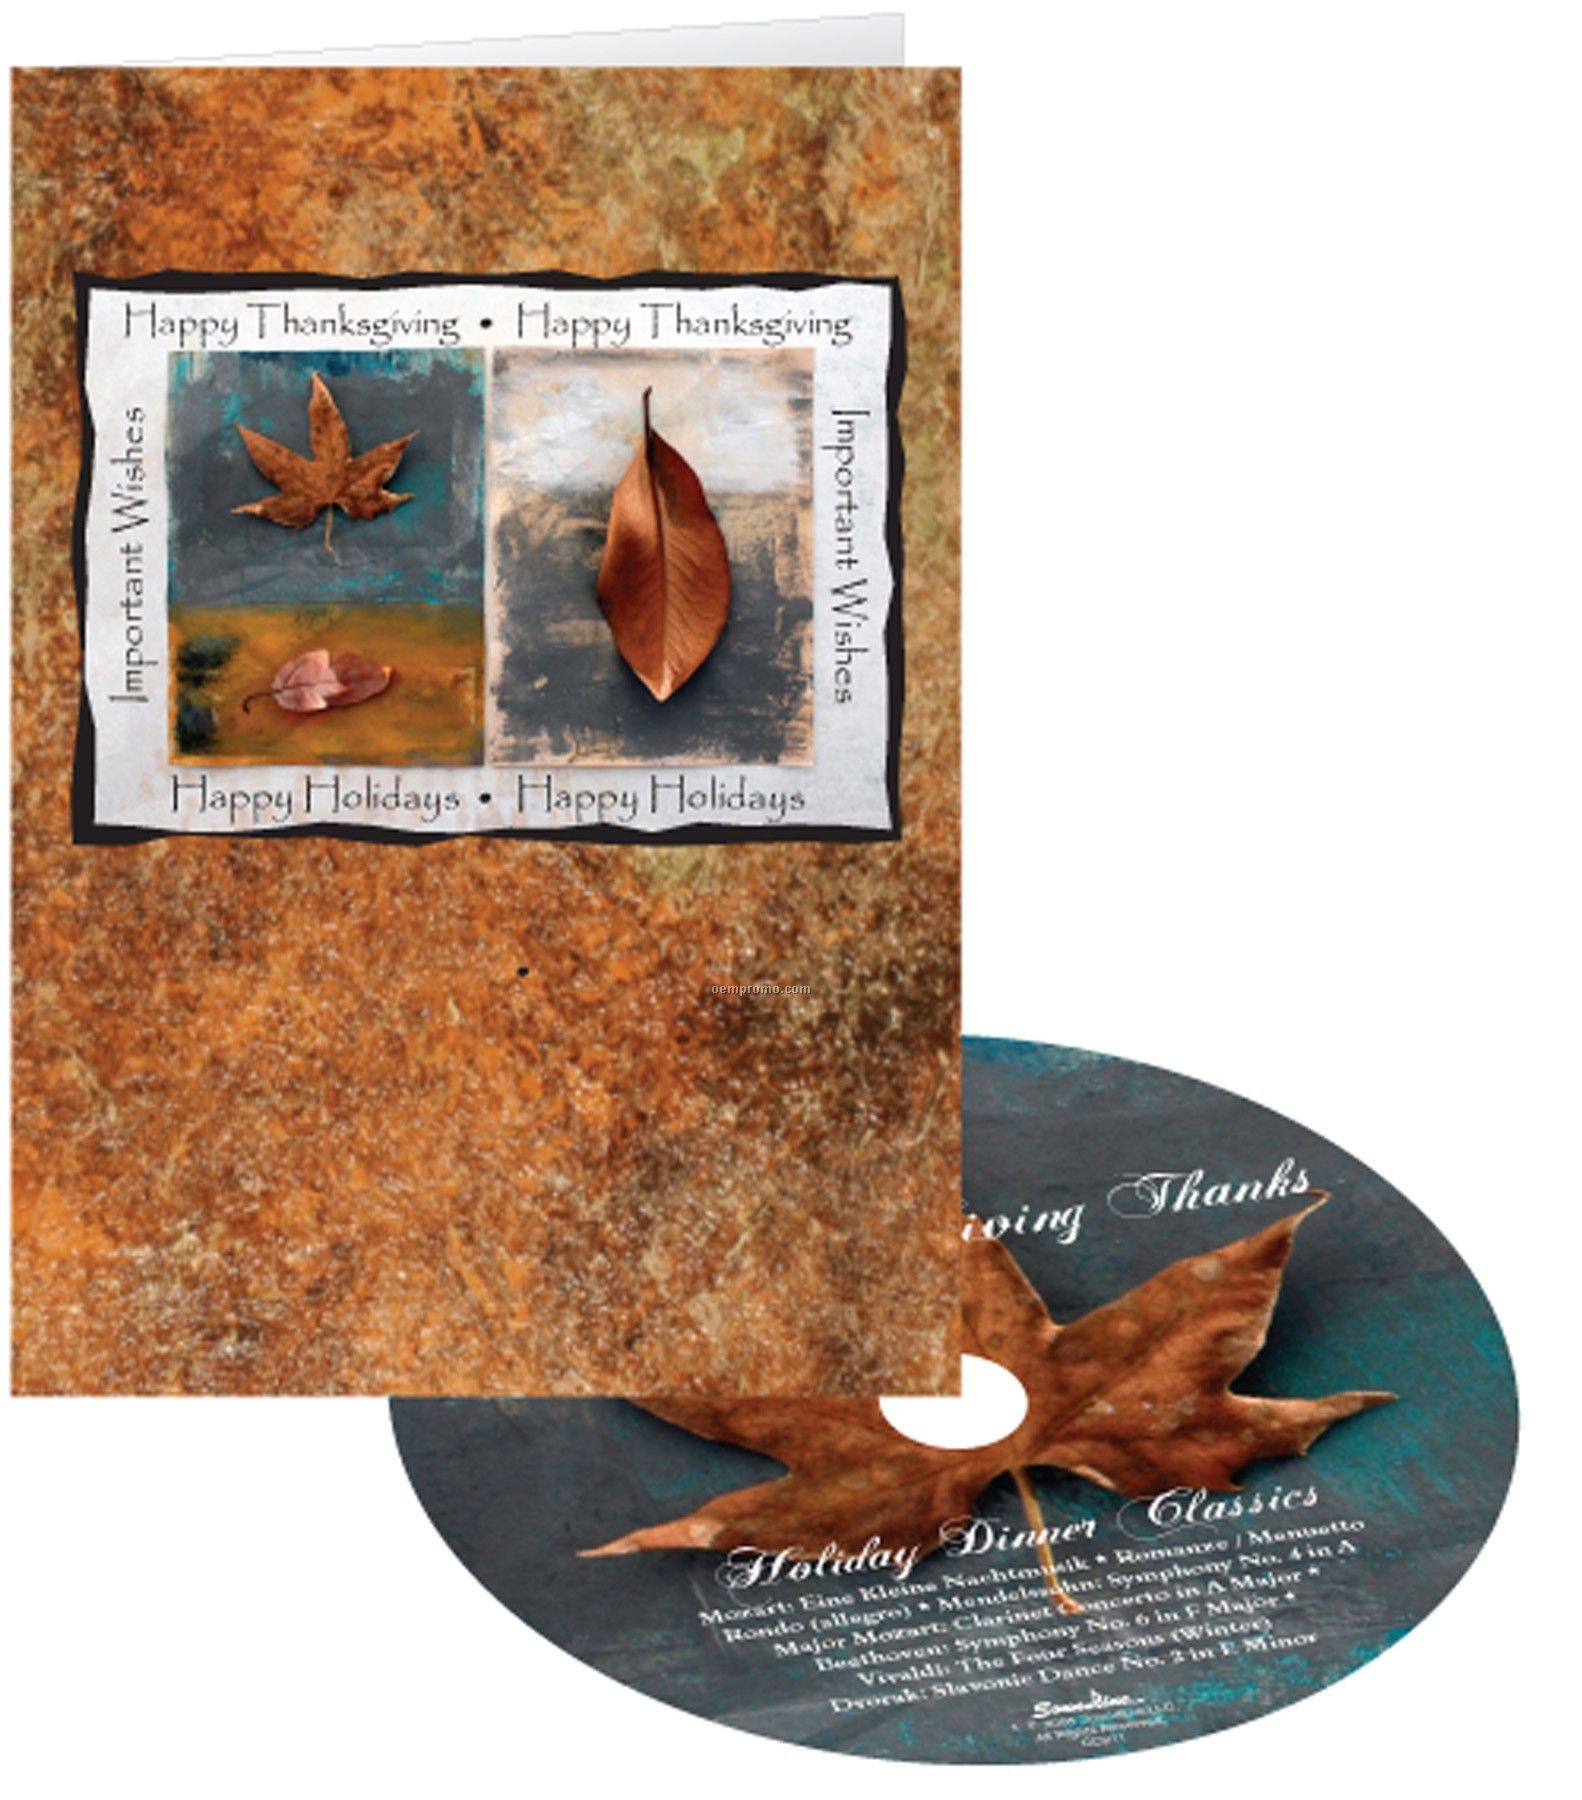 Happy Thanksgiving Greeting Card With Matching CD